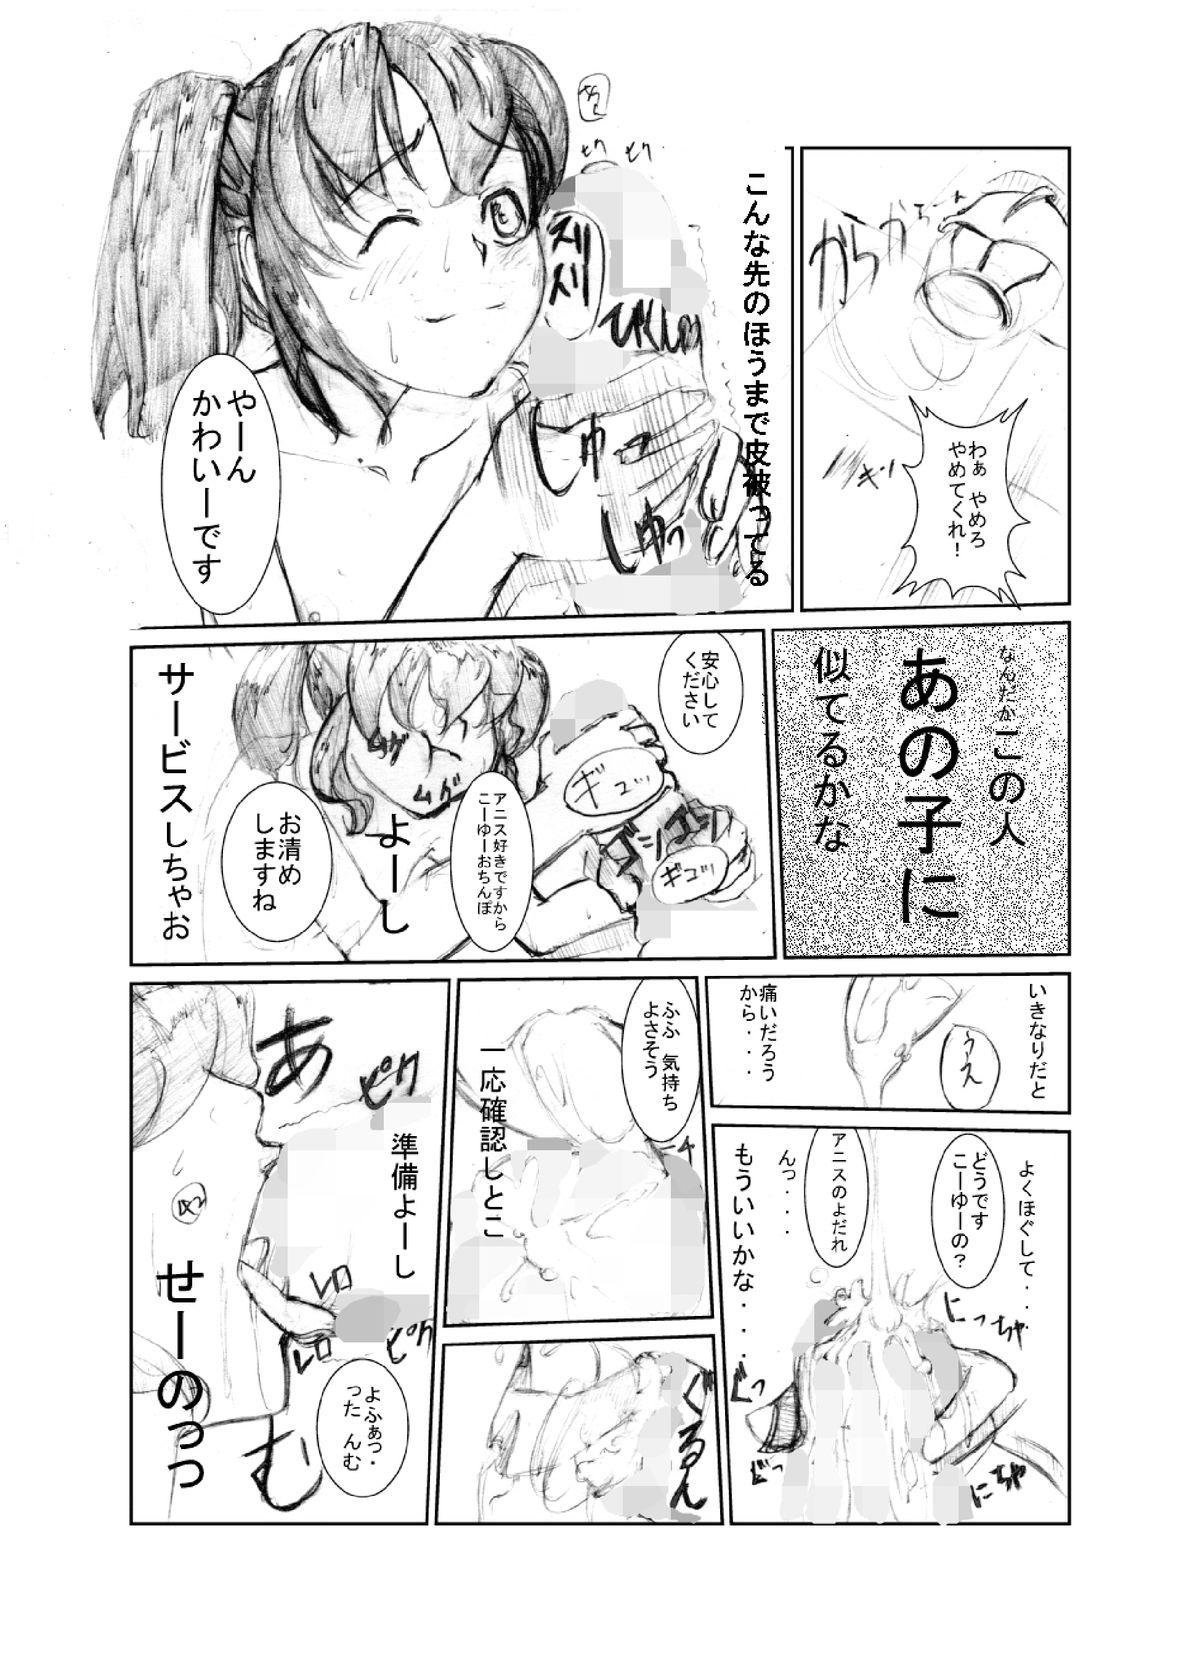 Hairy 虹は溶けゆく 朝焼けに - Tales of the abyss Horny Sluts - Page 11